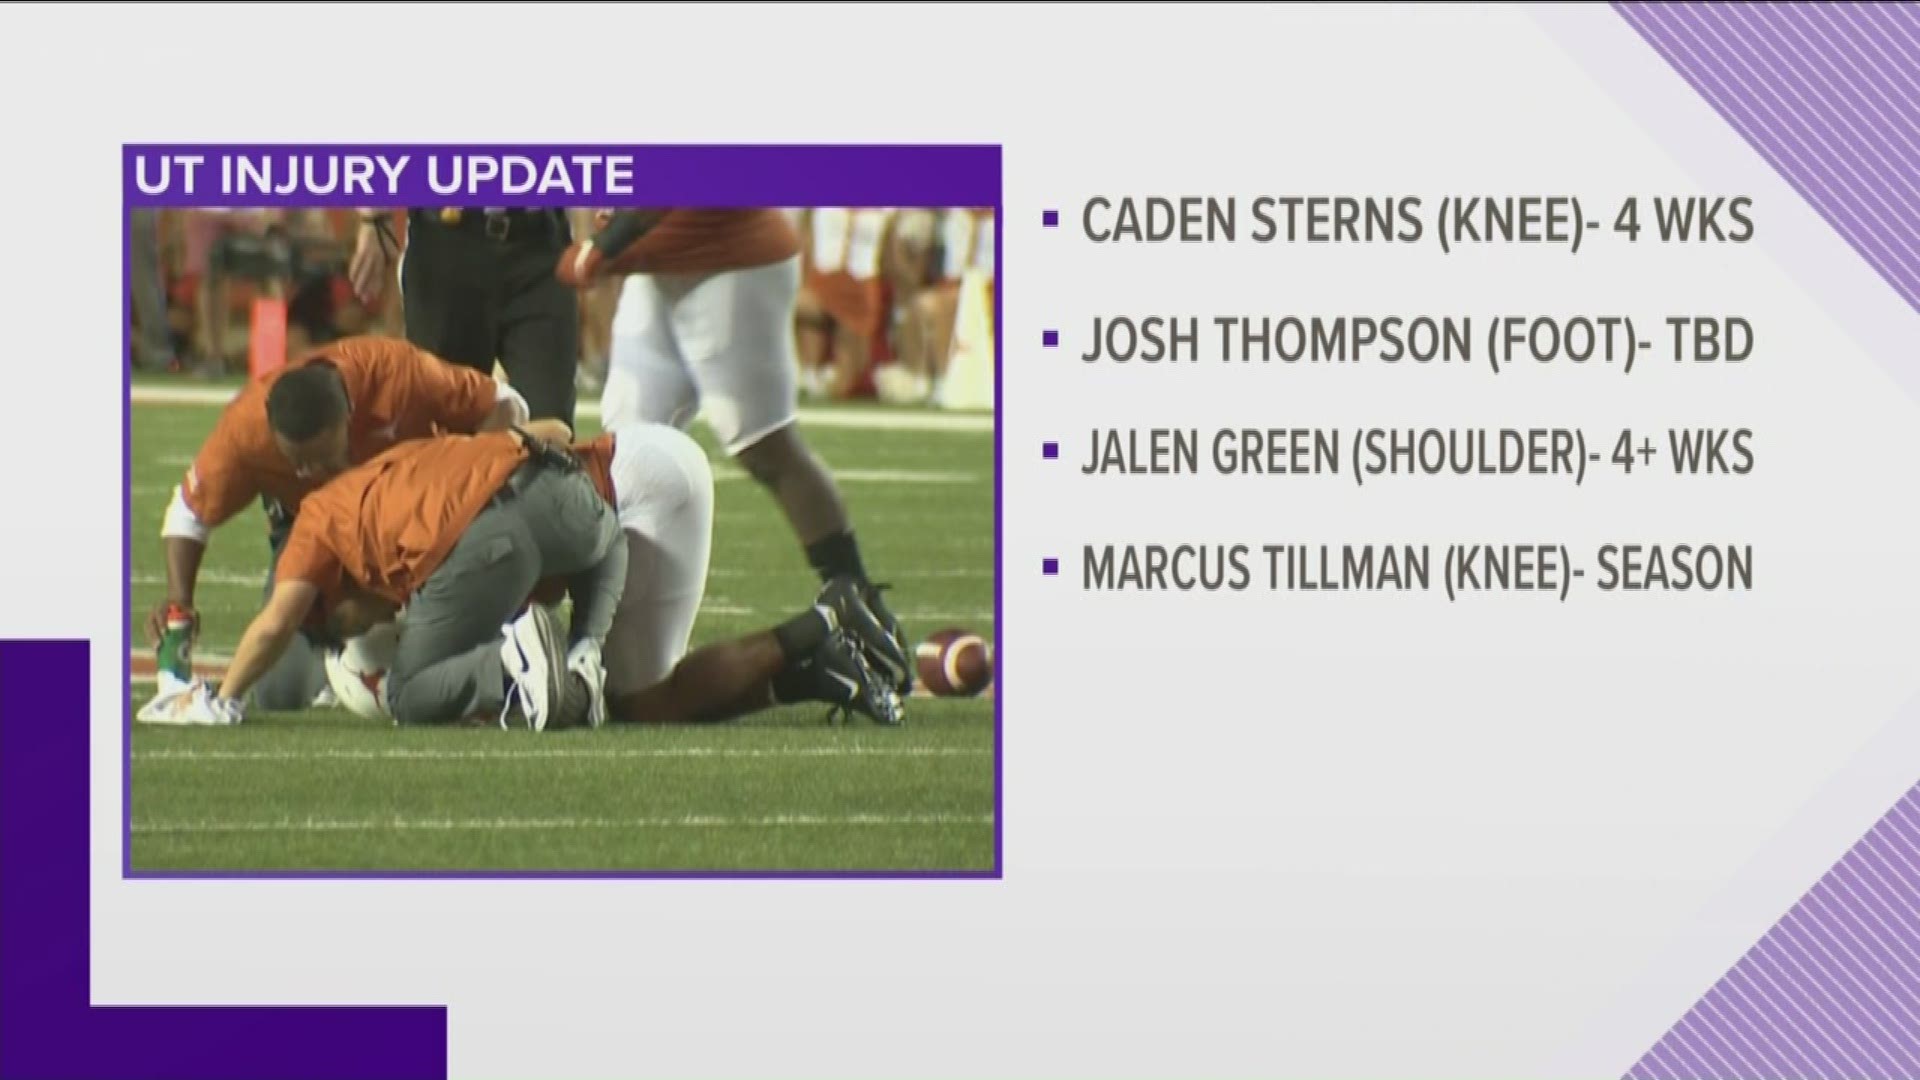 Texas announced multiple injury updates on Monday, where a few players were expected to miss a few weeks and one has been ruled out for the season.